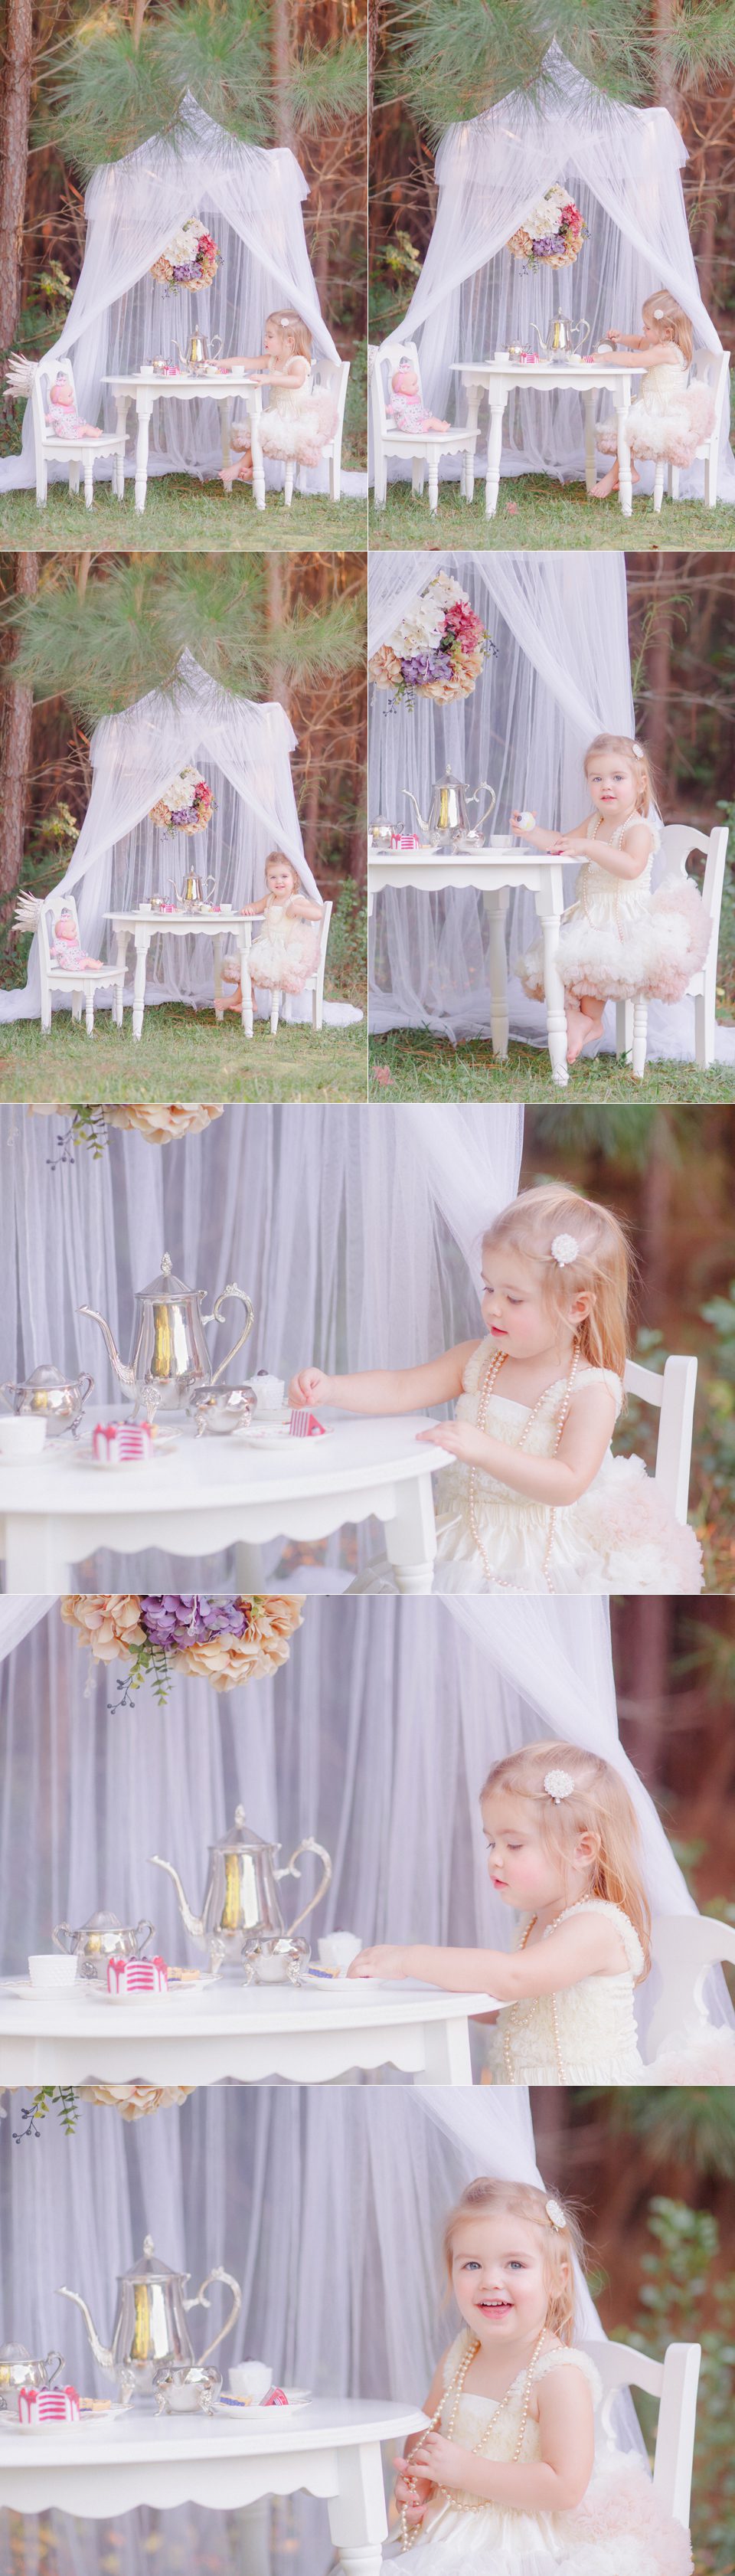 Professional child photography of a little girl having a tea party near Athens, GA.